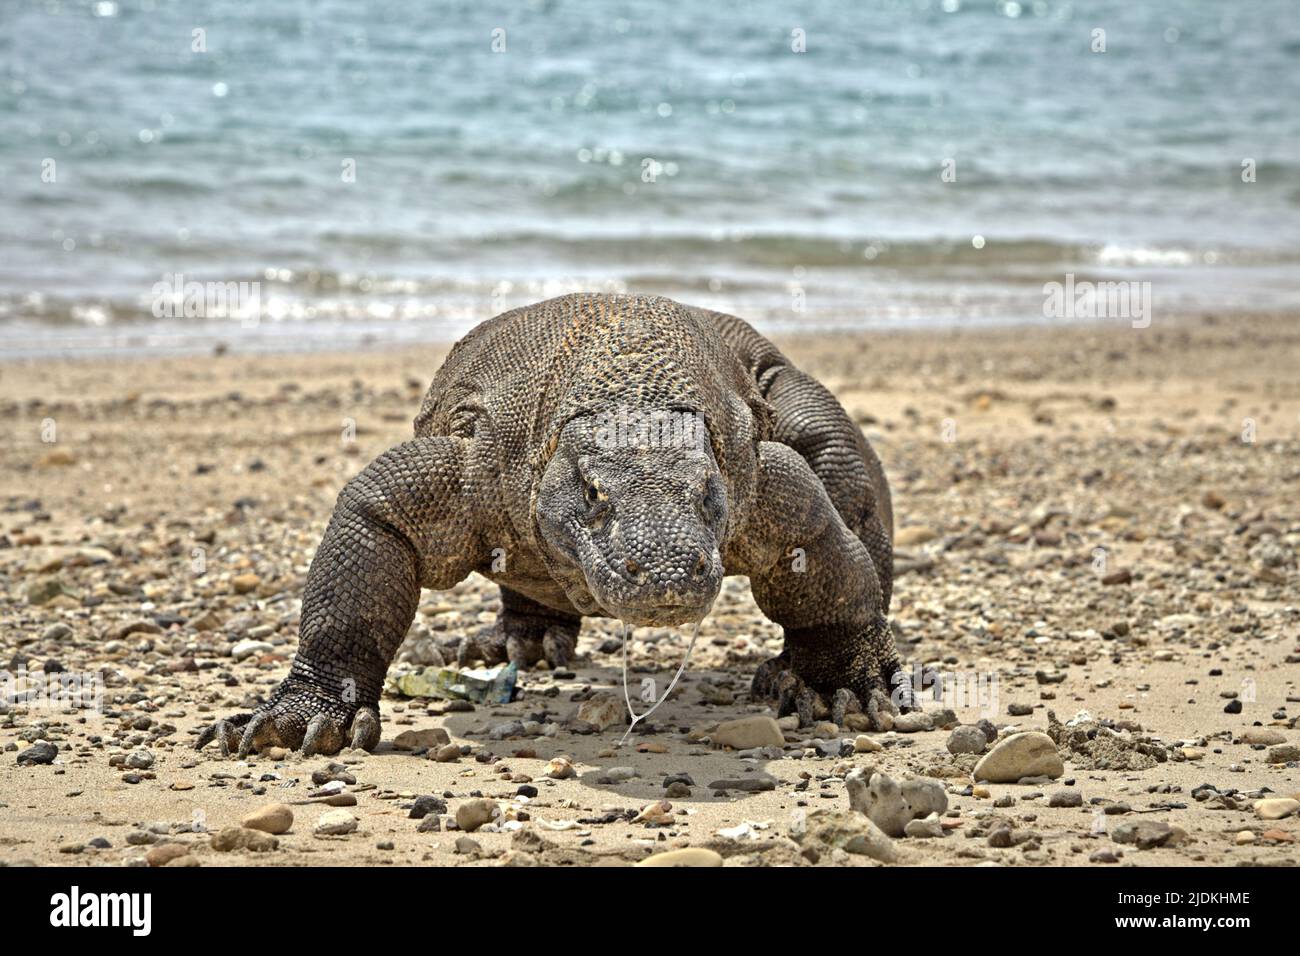 A komodo dragon (Varanus komodoensis) walking on a beach in Komodo Island, a part of Komodo National Park in West Manggarai, East Nusa Tenggara, Indonesia. A carnivorous varanid lizard, the world's largest lizard, komodo dragons reach a body mass up to 90 kg and a length of 3 meters, according to a team of scientists led by Brandon S. Boyd in their paper published in 2021 by Foot & Ankle Orthopaedics. Because of their large size, these lizards feed on prey that equal or exceed their own mass. Stock Photo